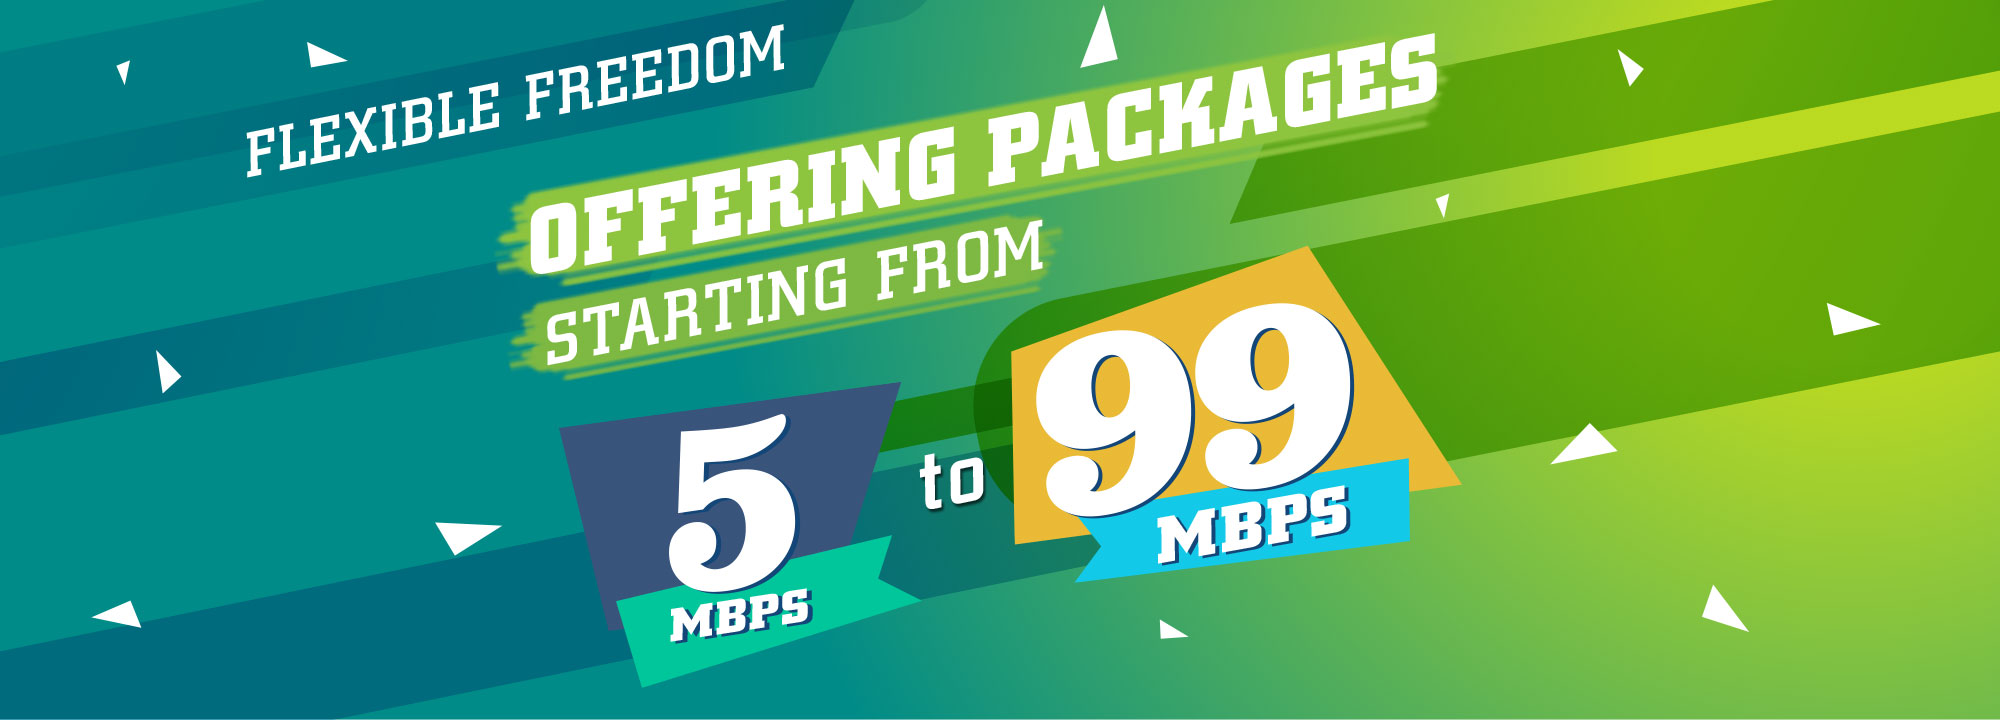 Flexible Internet Packages from 5Mb to 99Mb